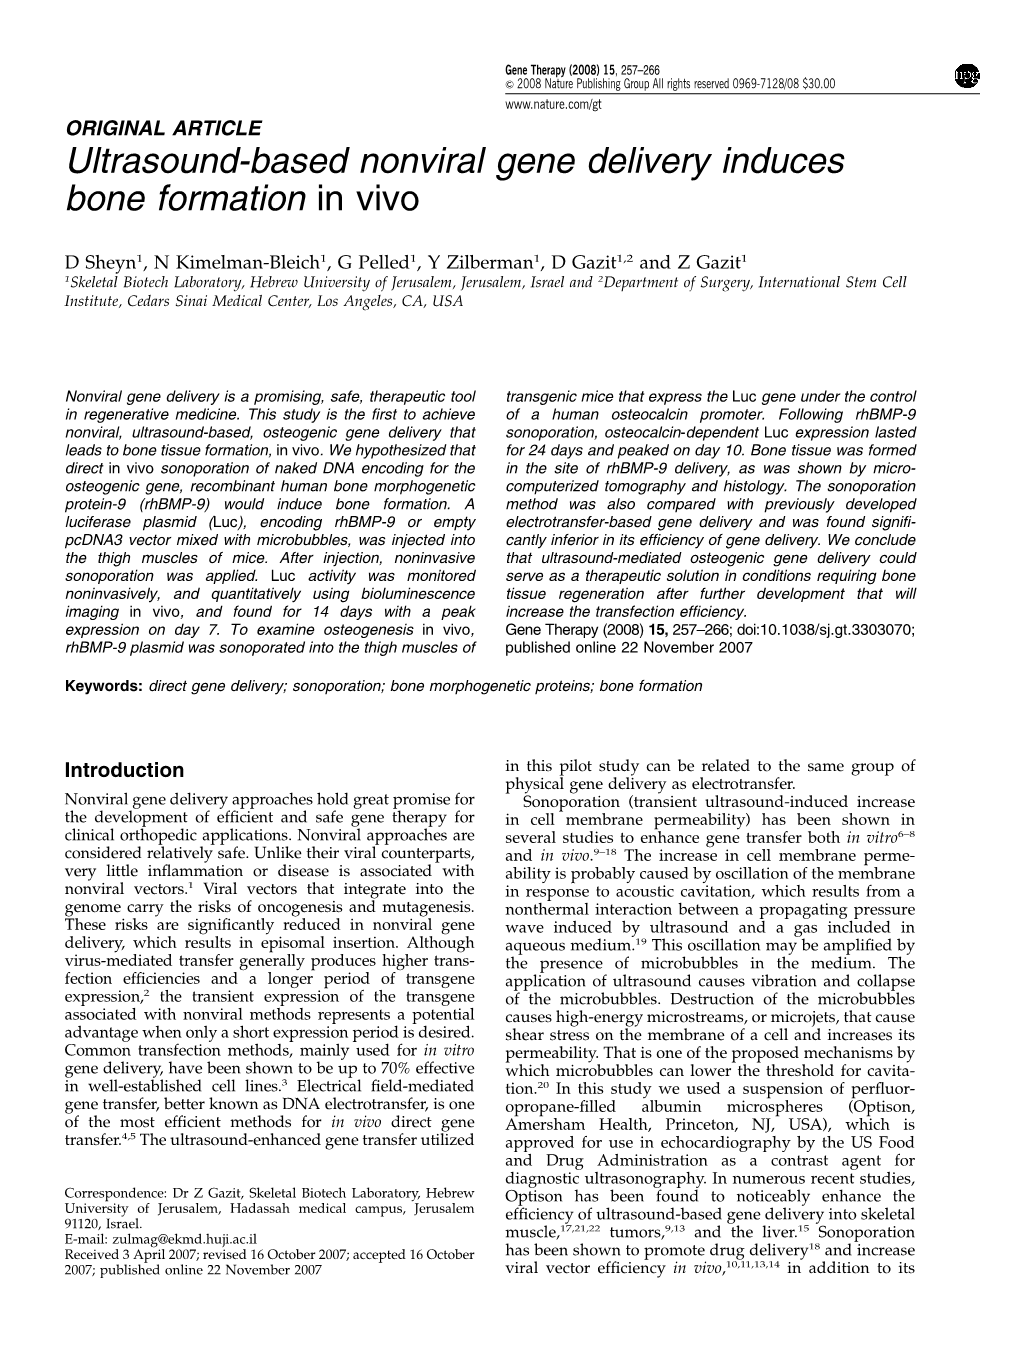 Ultrasound-Based Nonviral Gene Delivery Induces Bone Formation in Vivo